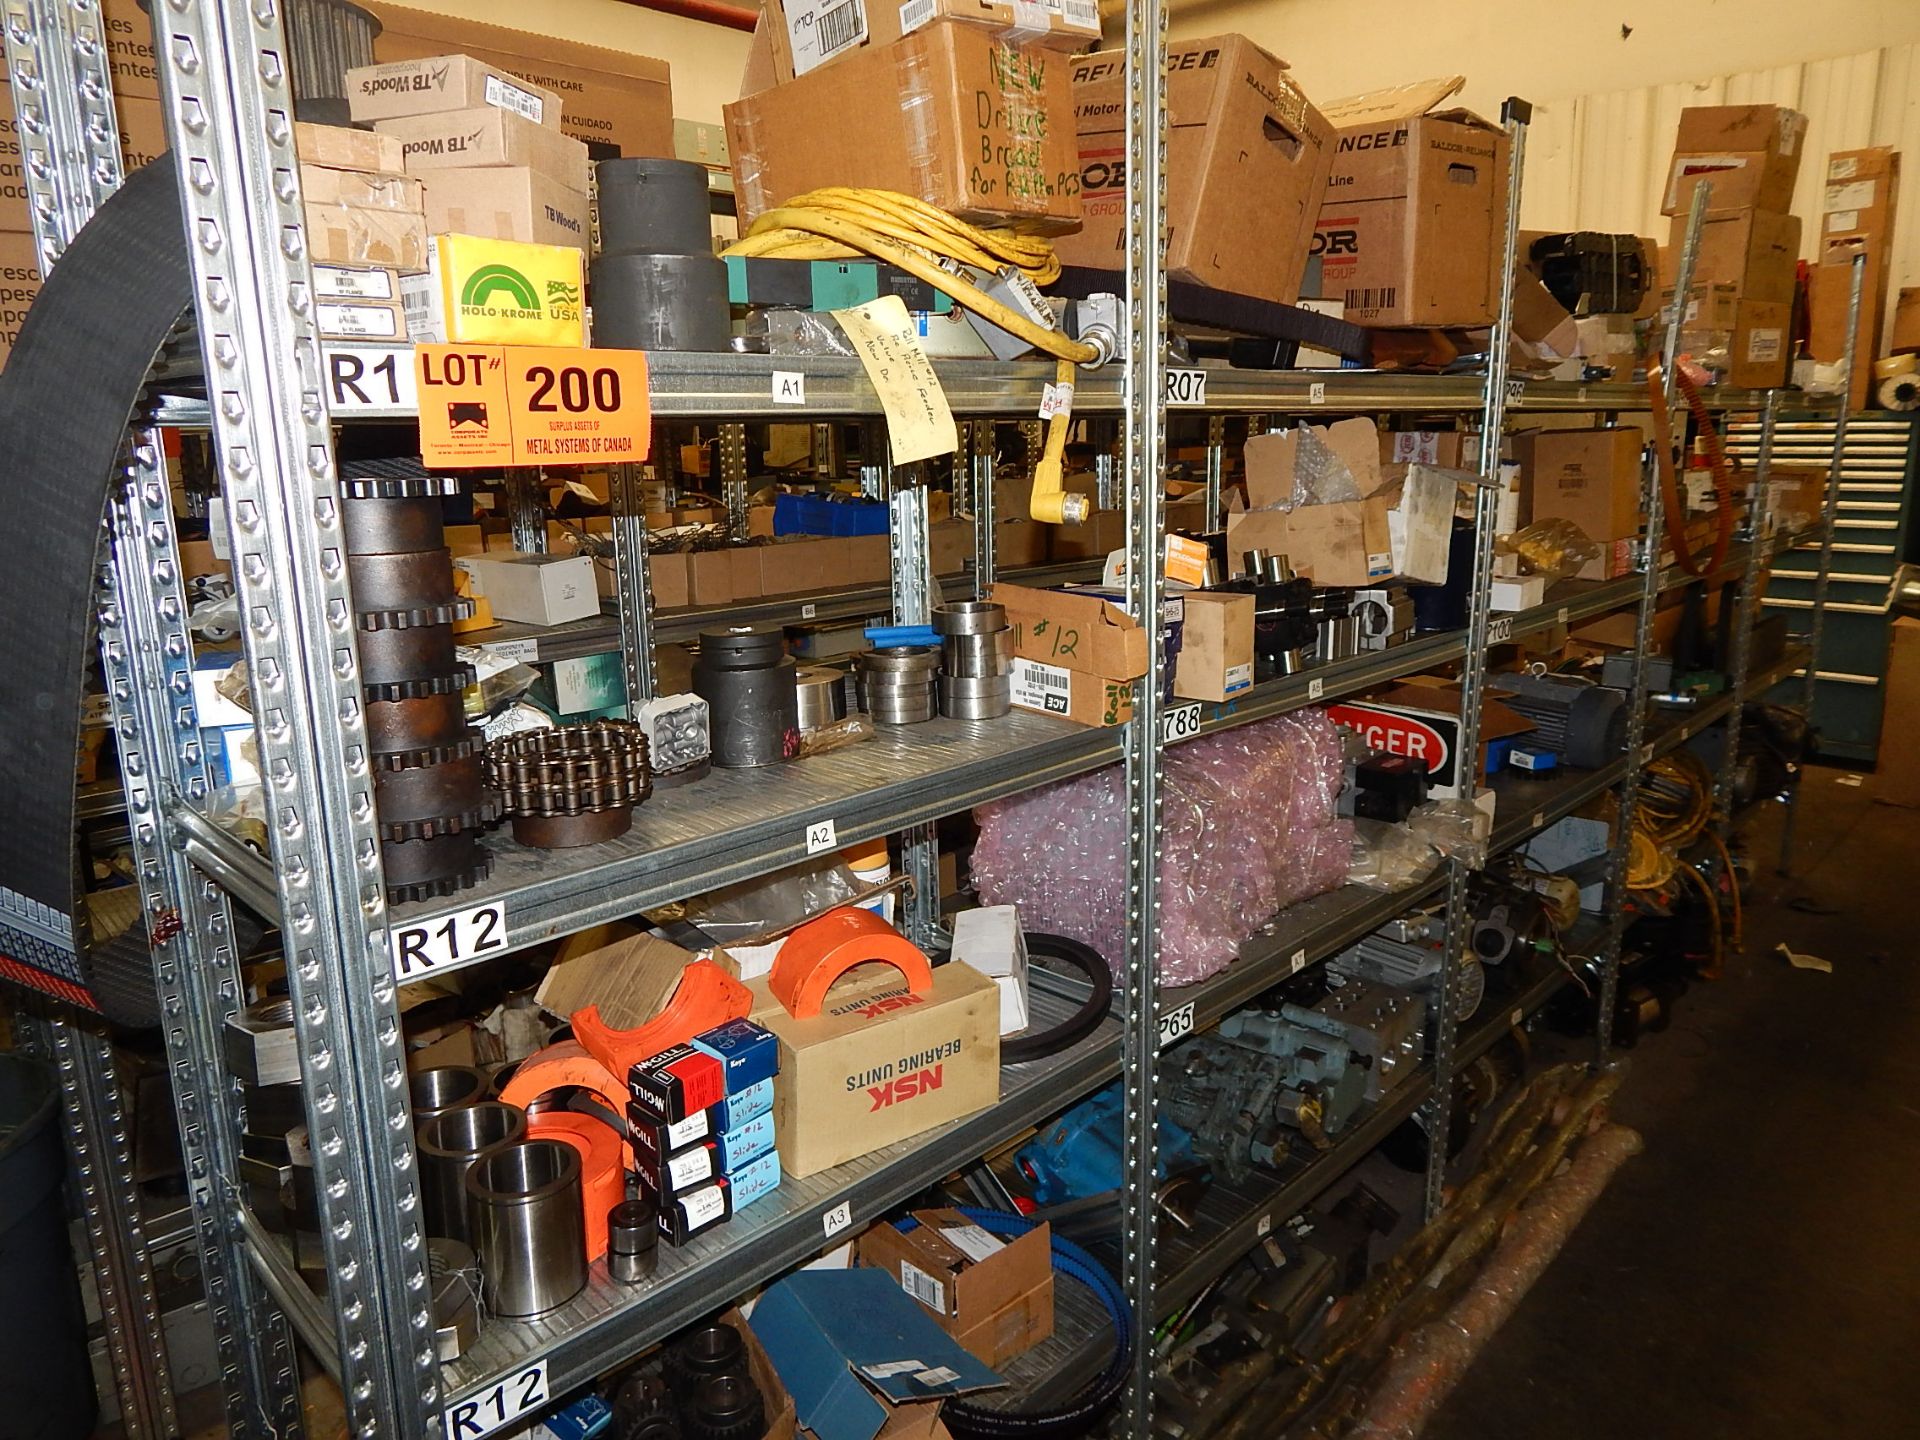 LOT/ CONTENTS OF SHELF CONSISTING OF ELECTRIC MOTORS, SPROCKETS, BELTS, WIRE AND PARTS